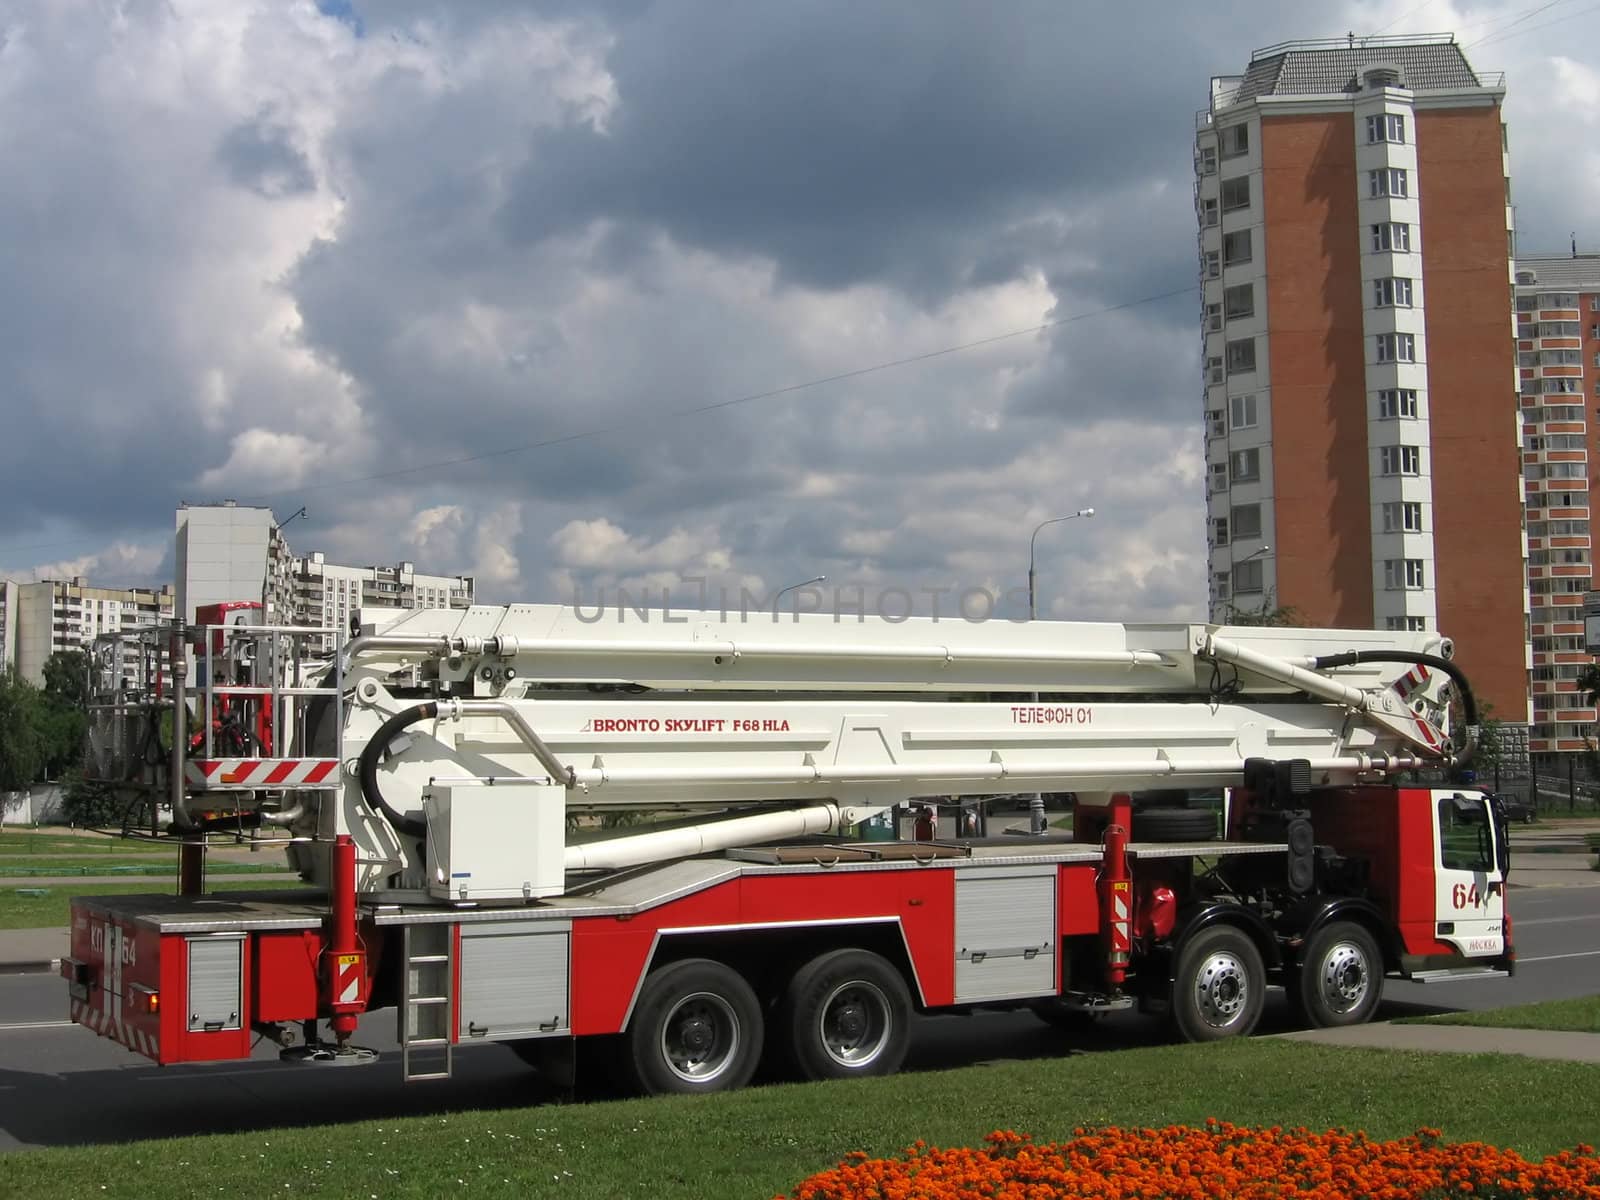 Very beautiful long fire truck in Moscow on a background of gray clouds